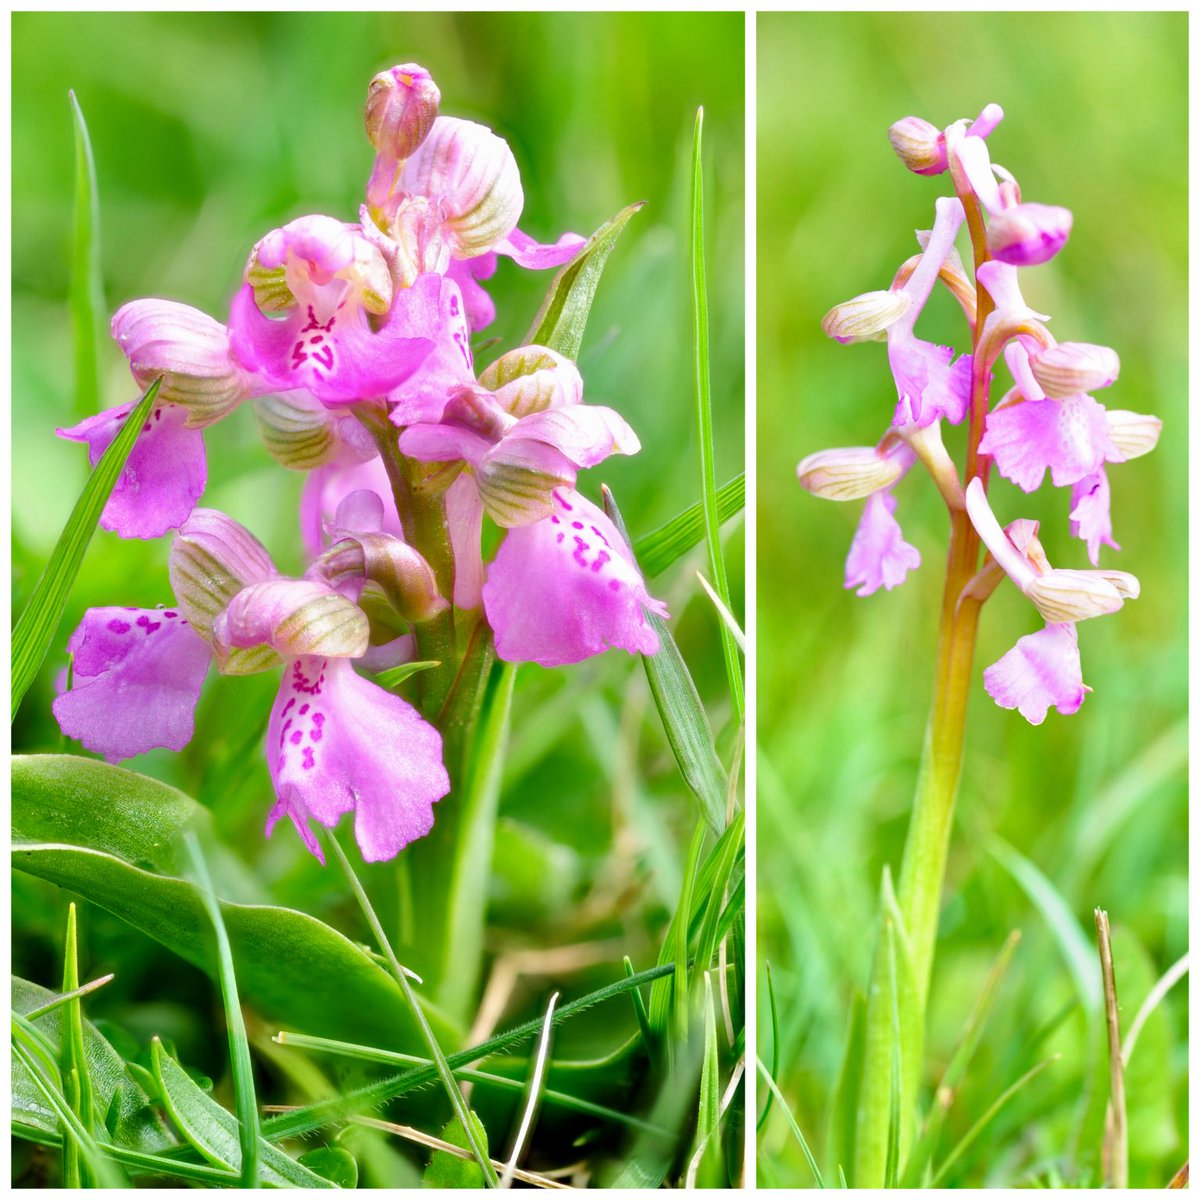 Do love a pink Green-Winged orchid (Anacamptis morio) #silverdale #wildflowerhour @bsbi ⁦@ukorchids⁩